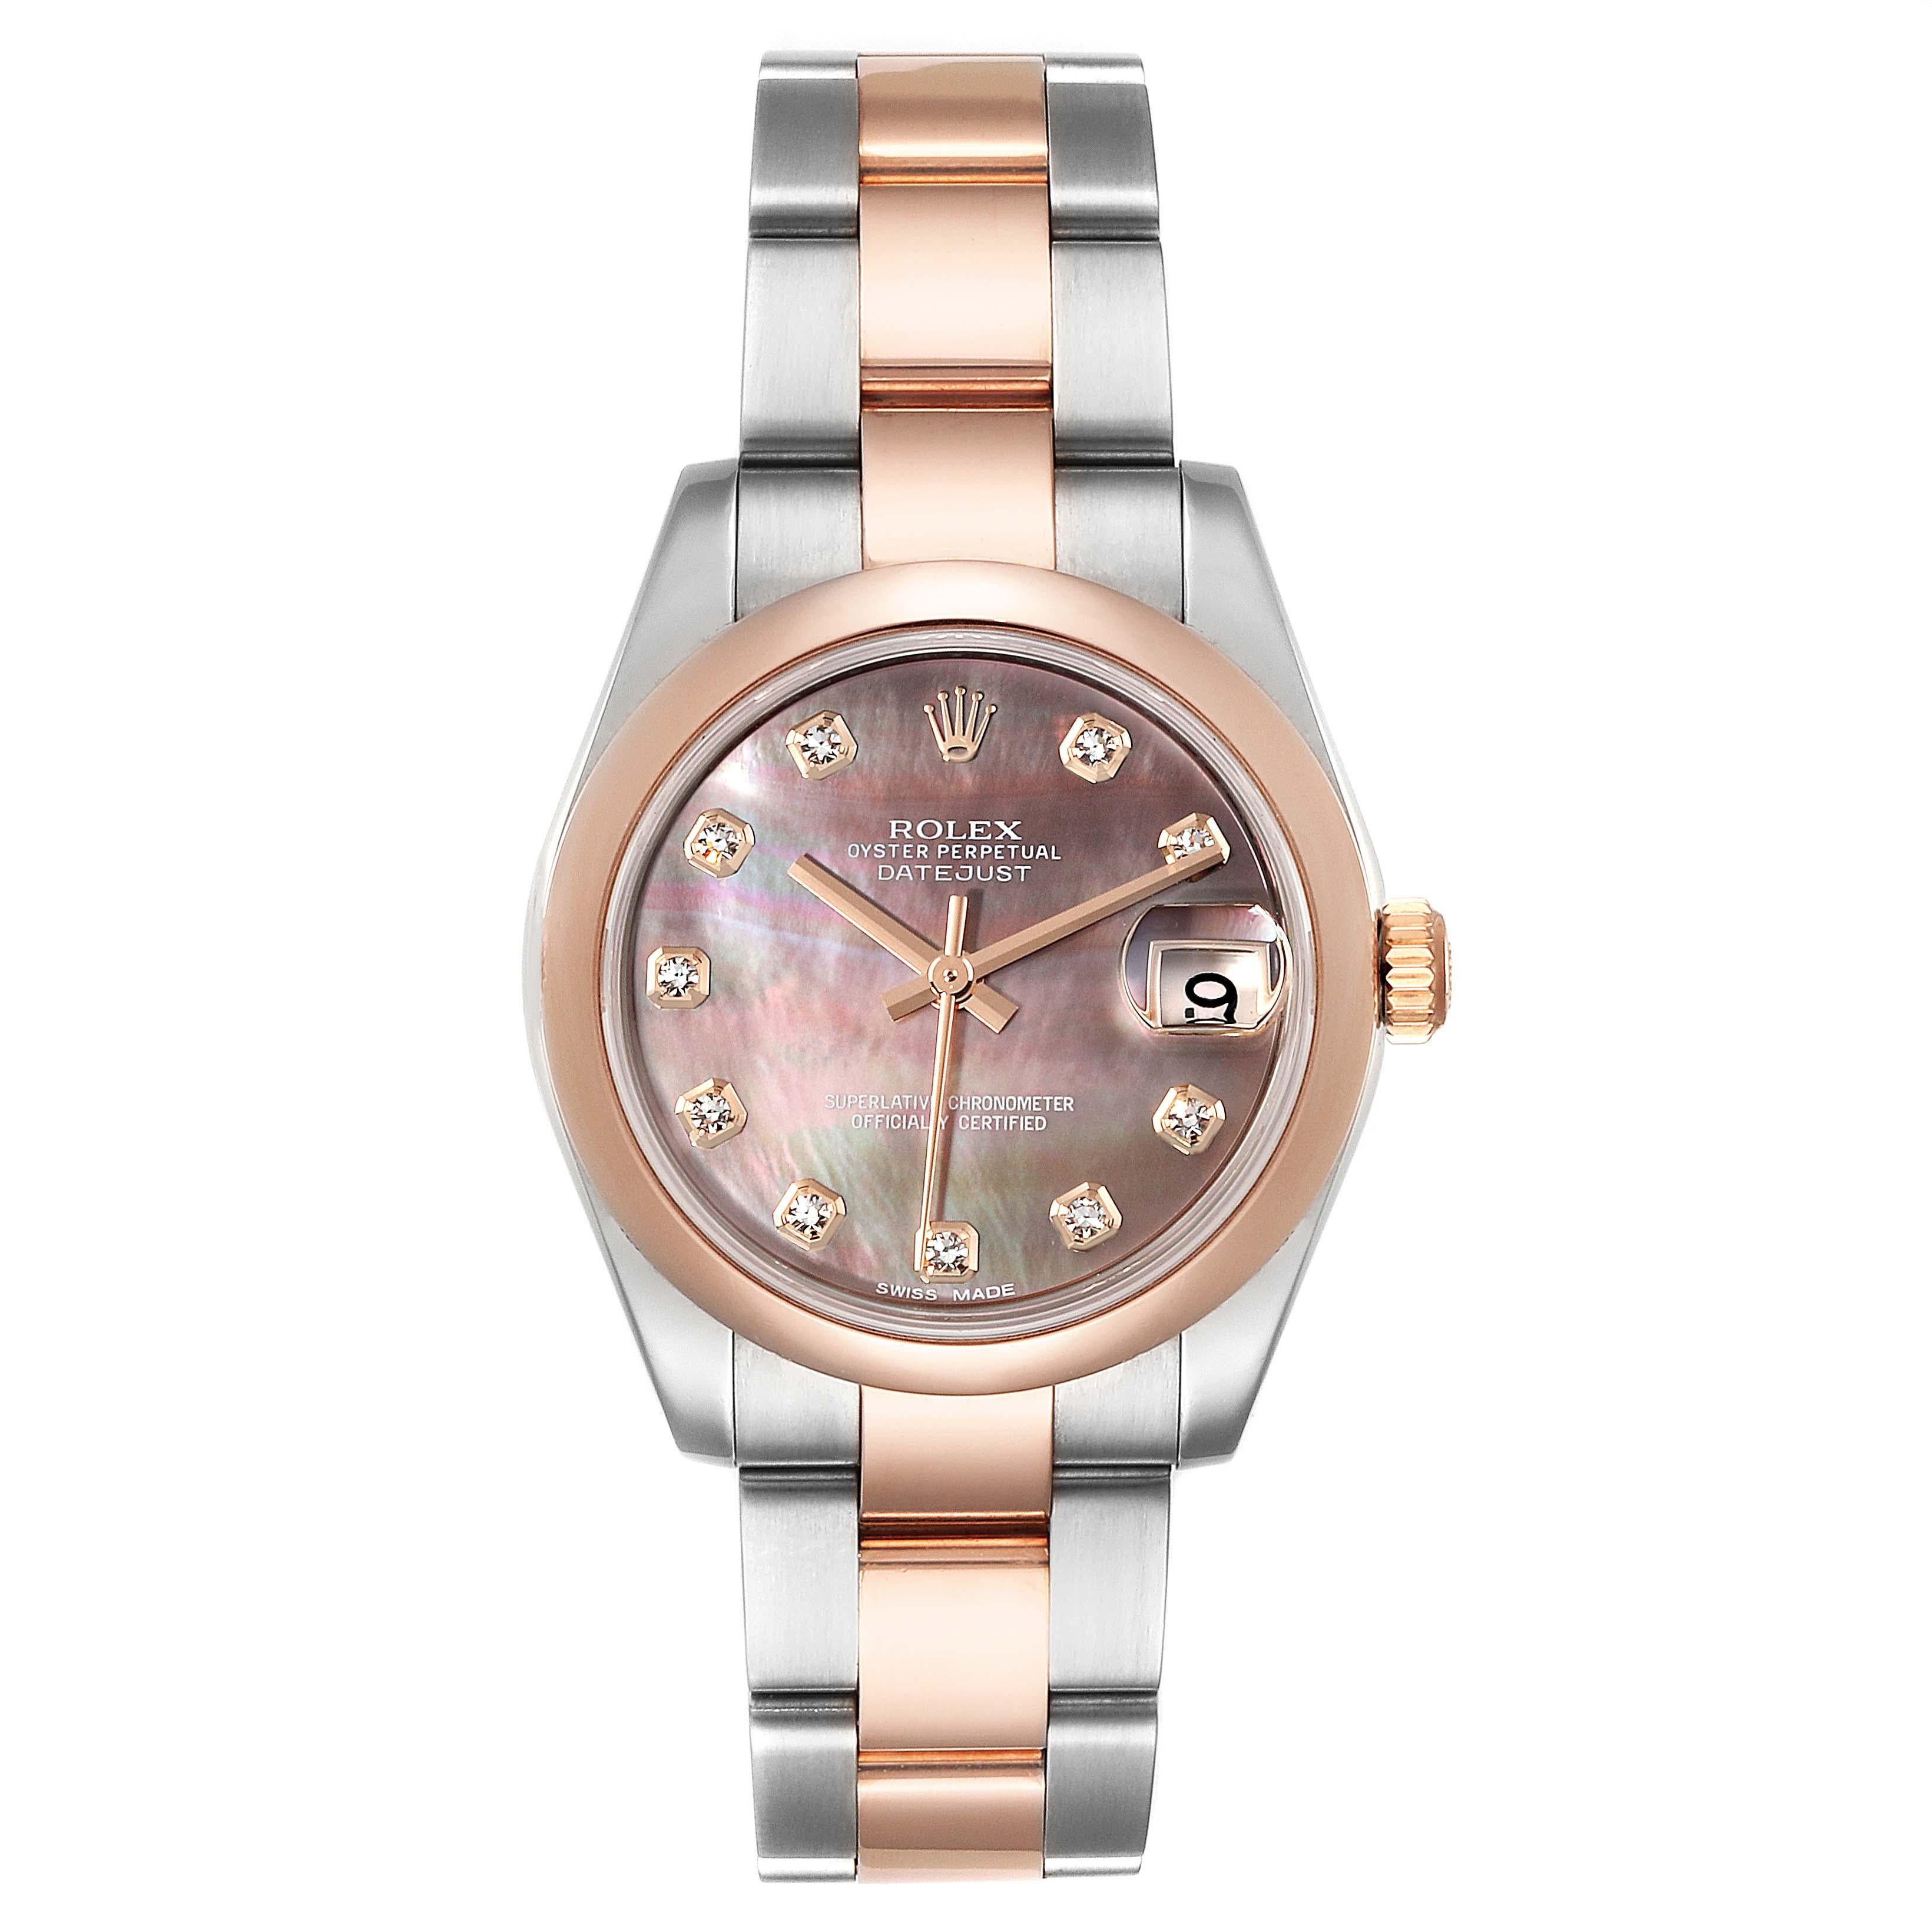 Rolex Datejust 31 Midsize Steel Rose Gold MOP Diamond Ladies Watch 178241. Officially certified chronometer self-winding movement. Stainless steel and rose gold oyster case 31.0 mm in diameter. Rolex logo on a crown. Stainless steel and 18k yellow